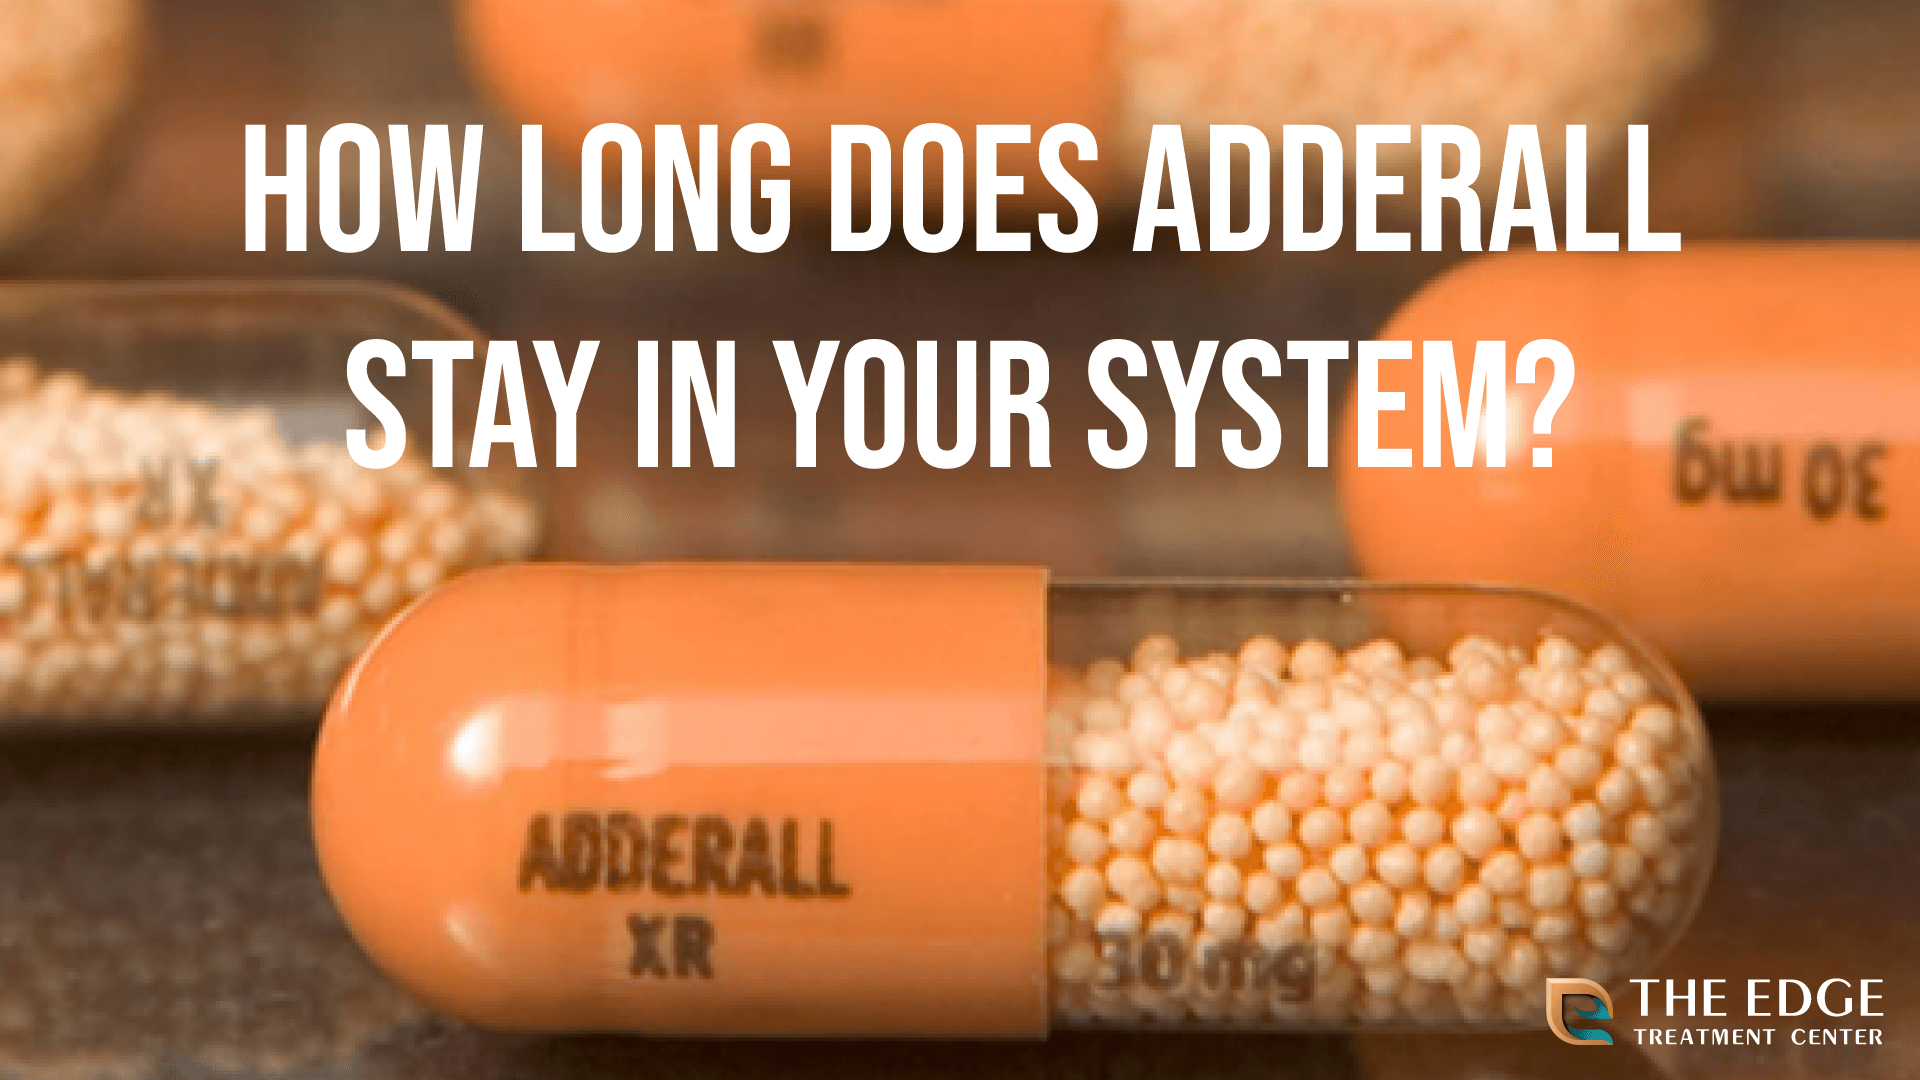 Adderall Vs Modafinil: Which Is Better For Adhd?